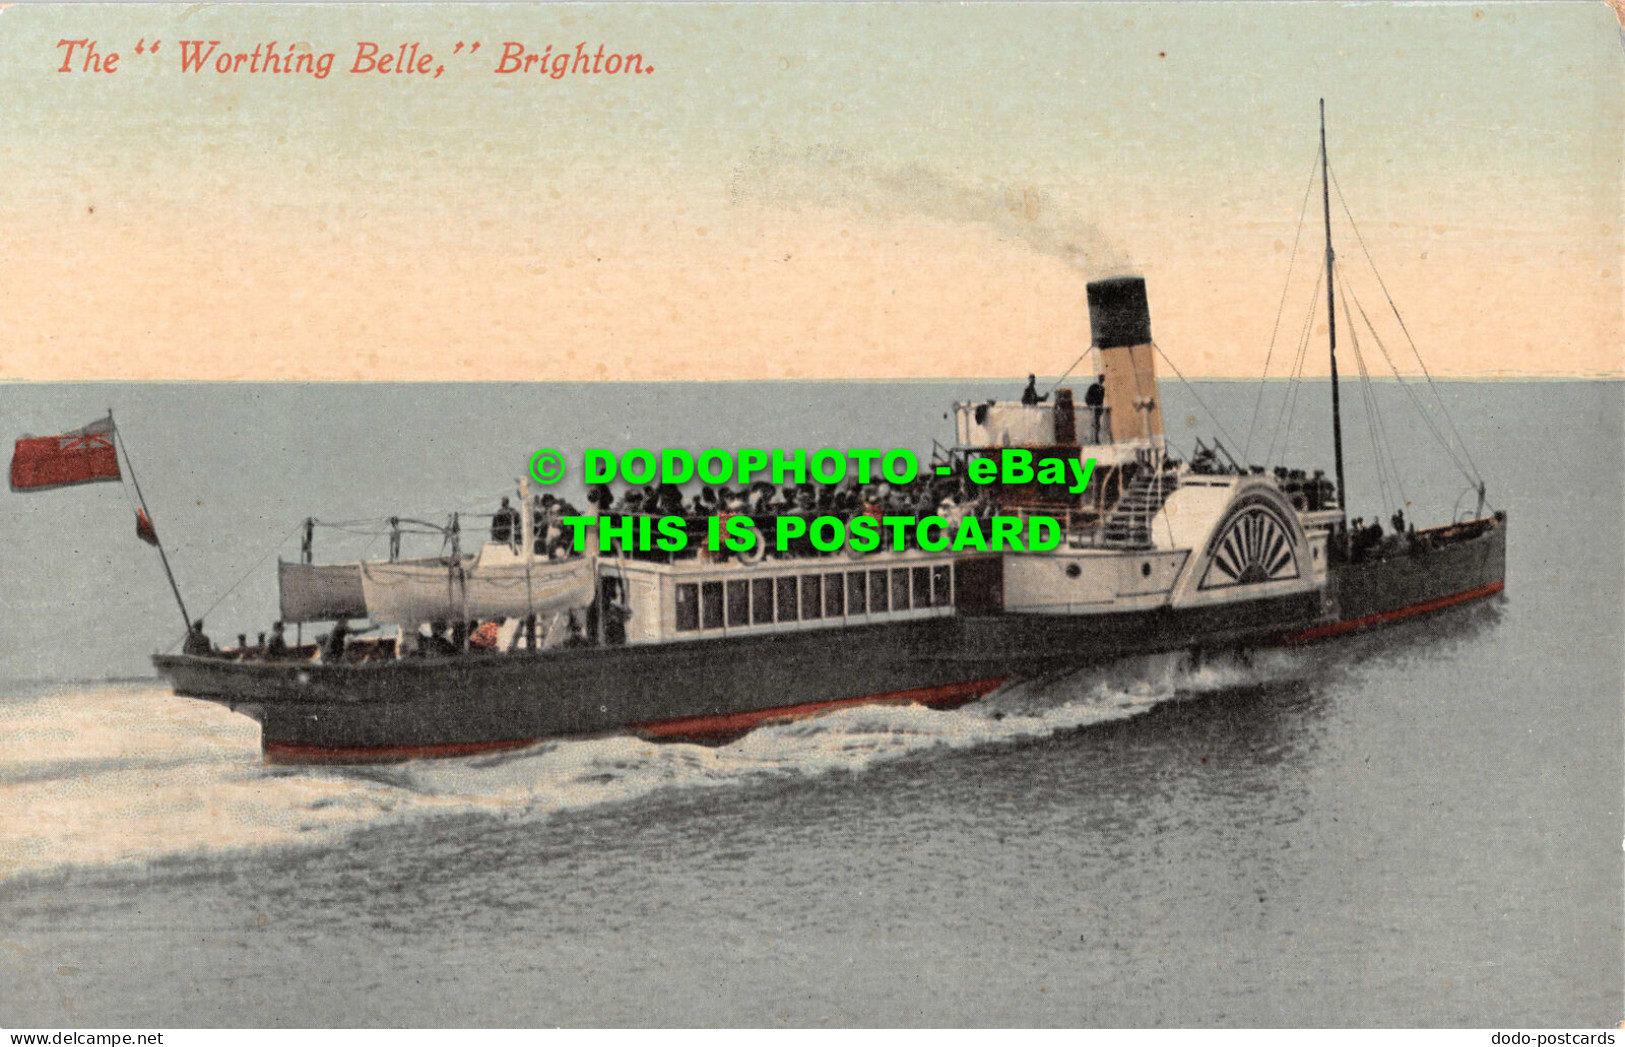 R546855 Brighton. The Worthing Belle. The Brighton Palace Series. No. 165 - World